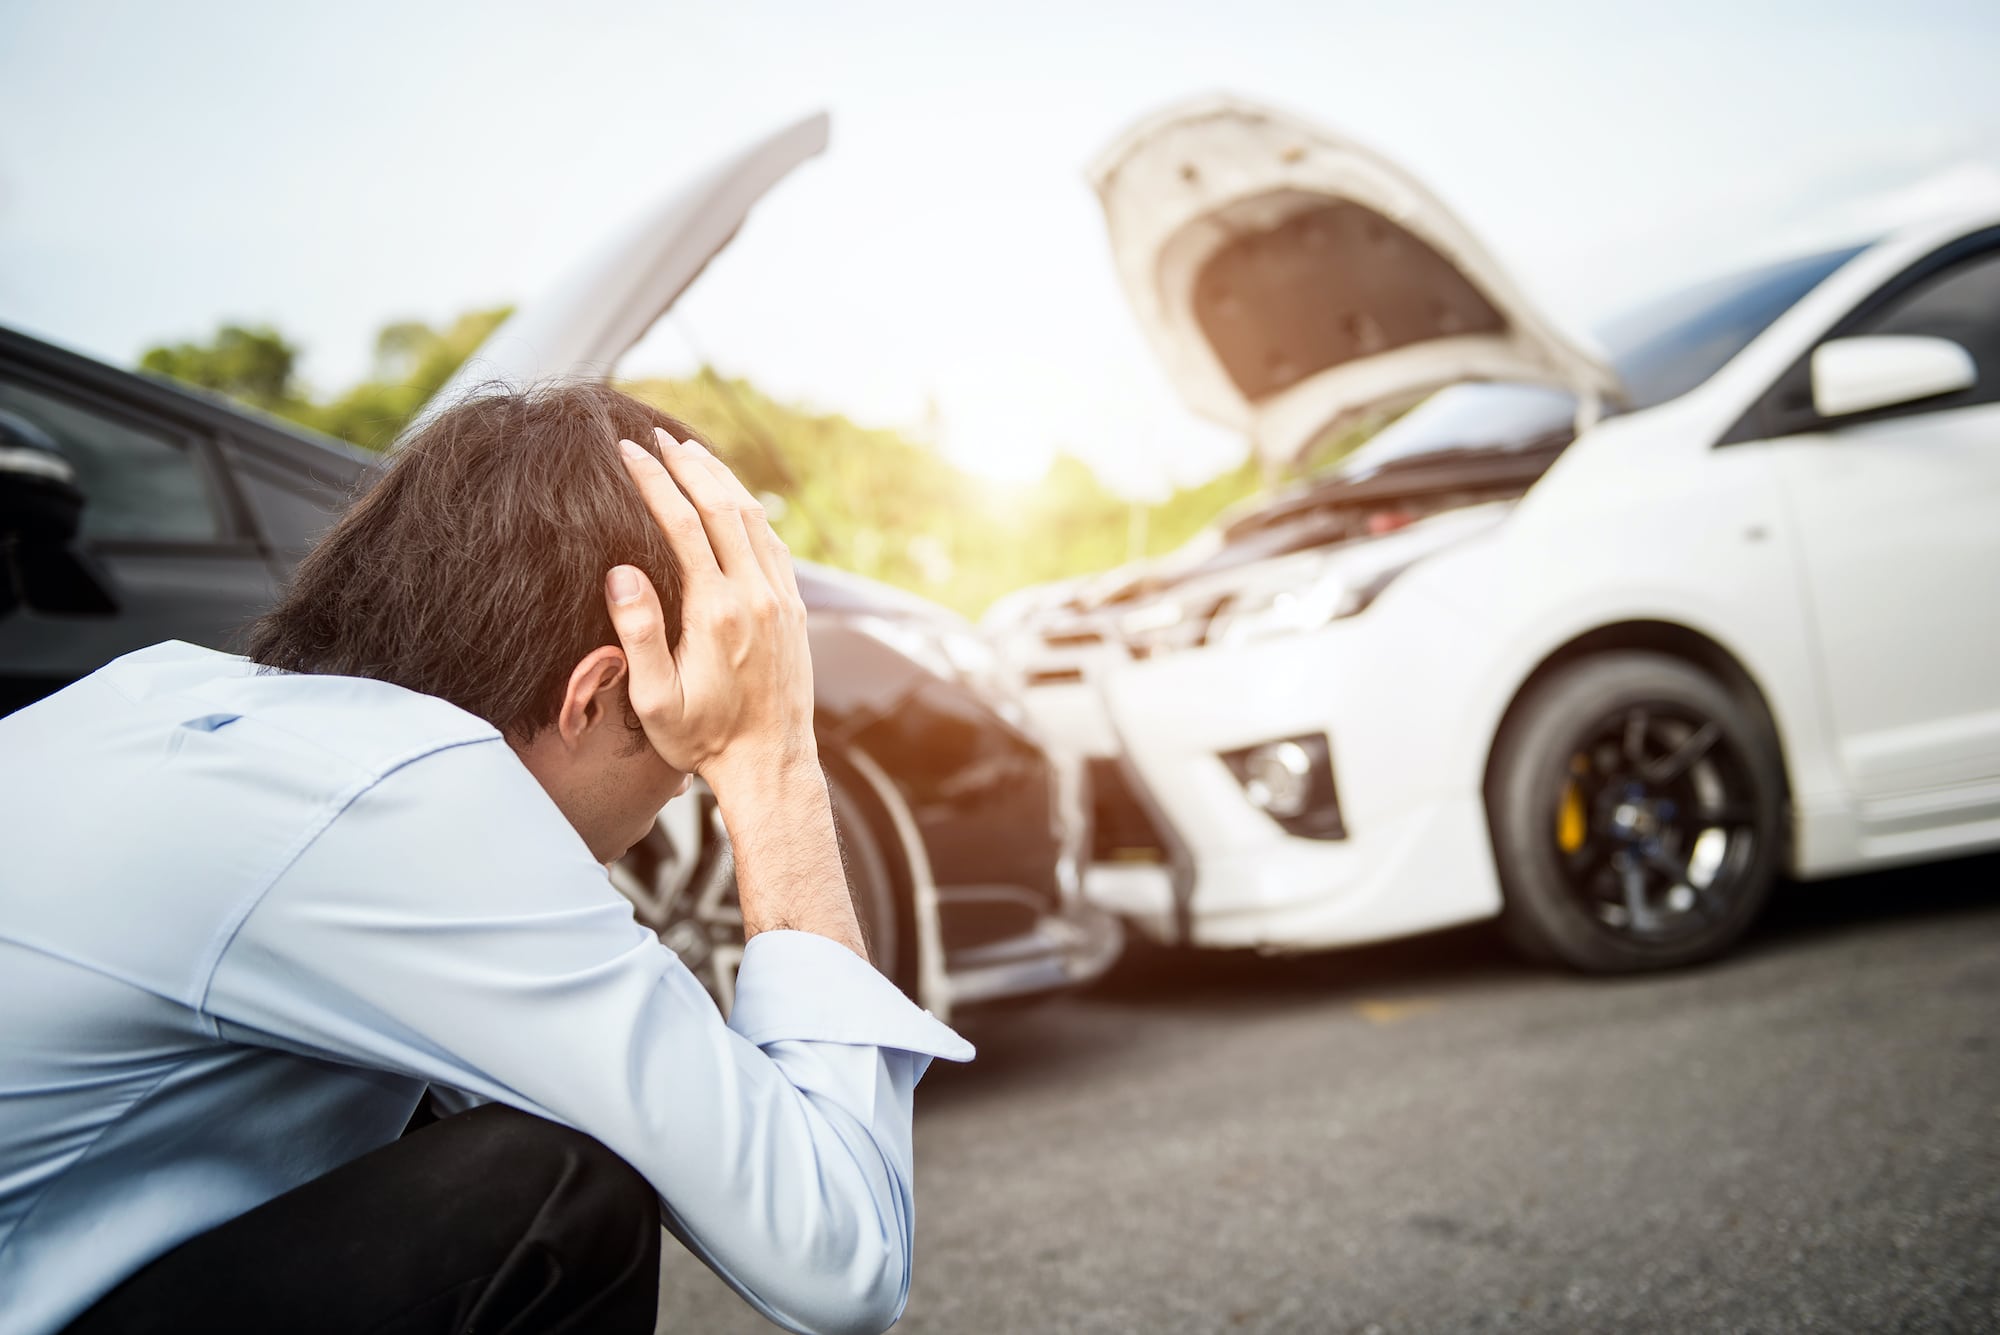 statute of limitations for ohio car accidents